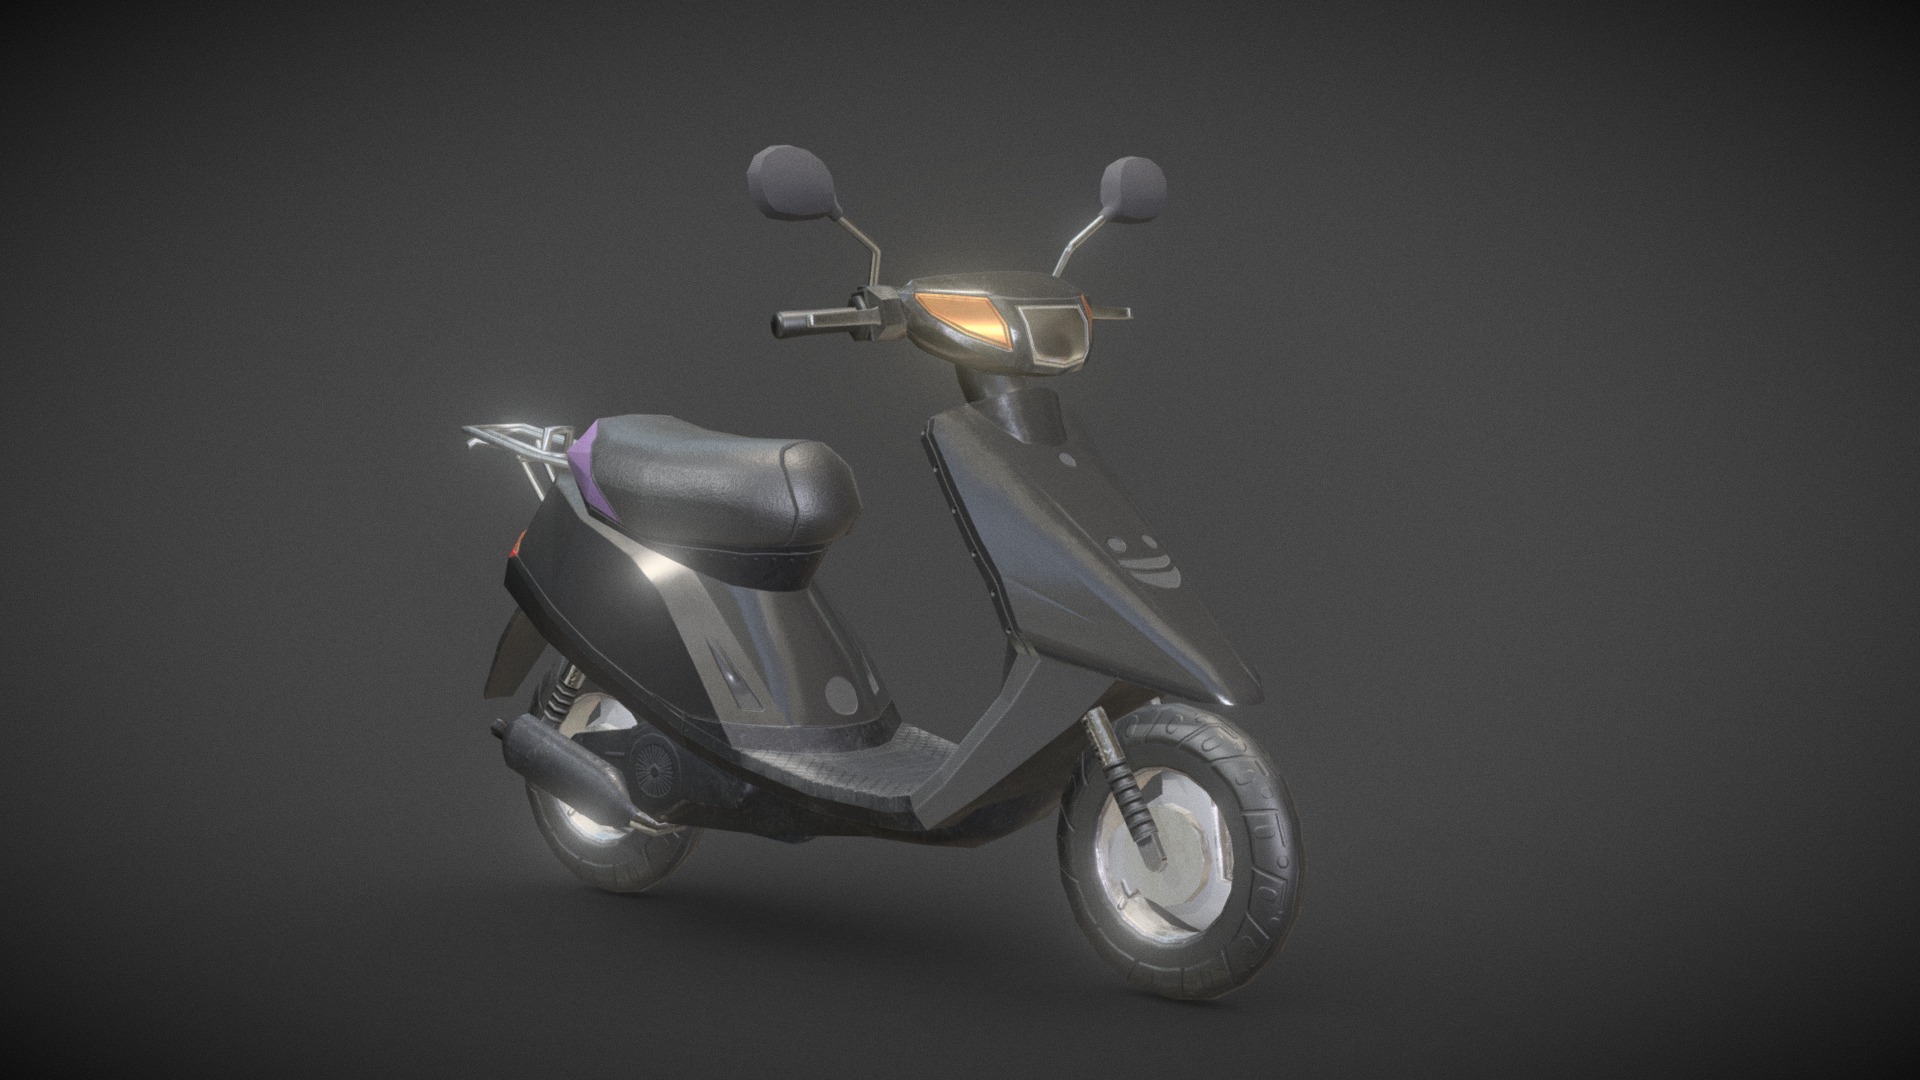 3D model Scooter mobile lowpoly - This is a 3D model of the Scooter mobile lowpoly. The 3D model is about a black and silver scooter.